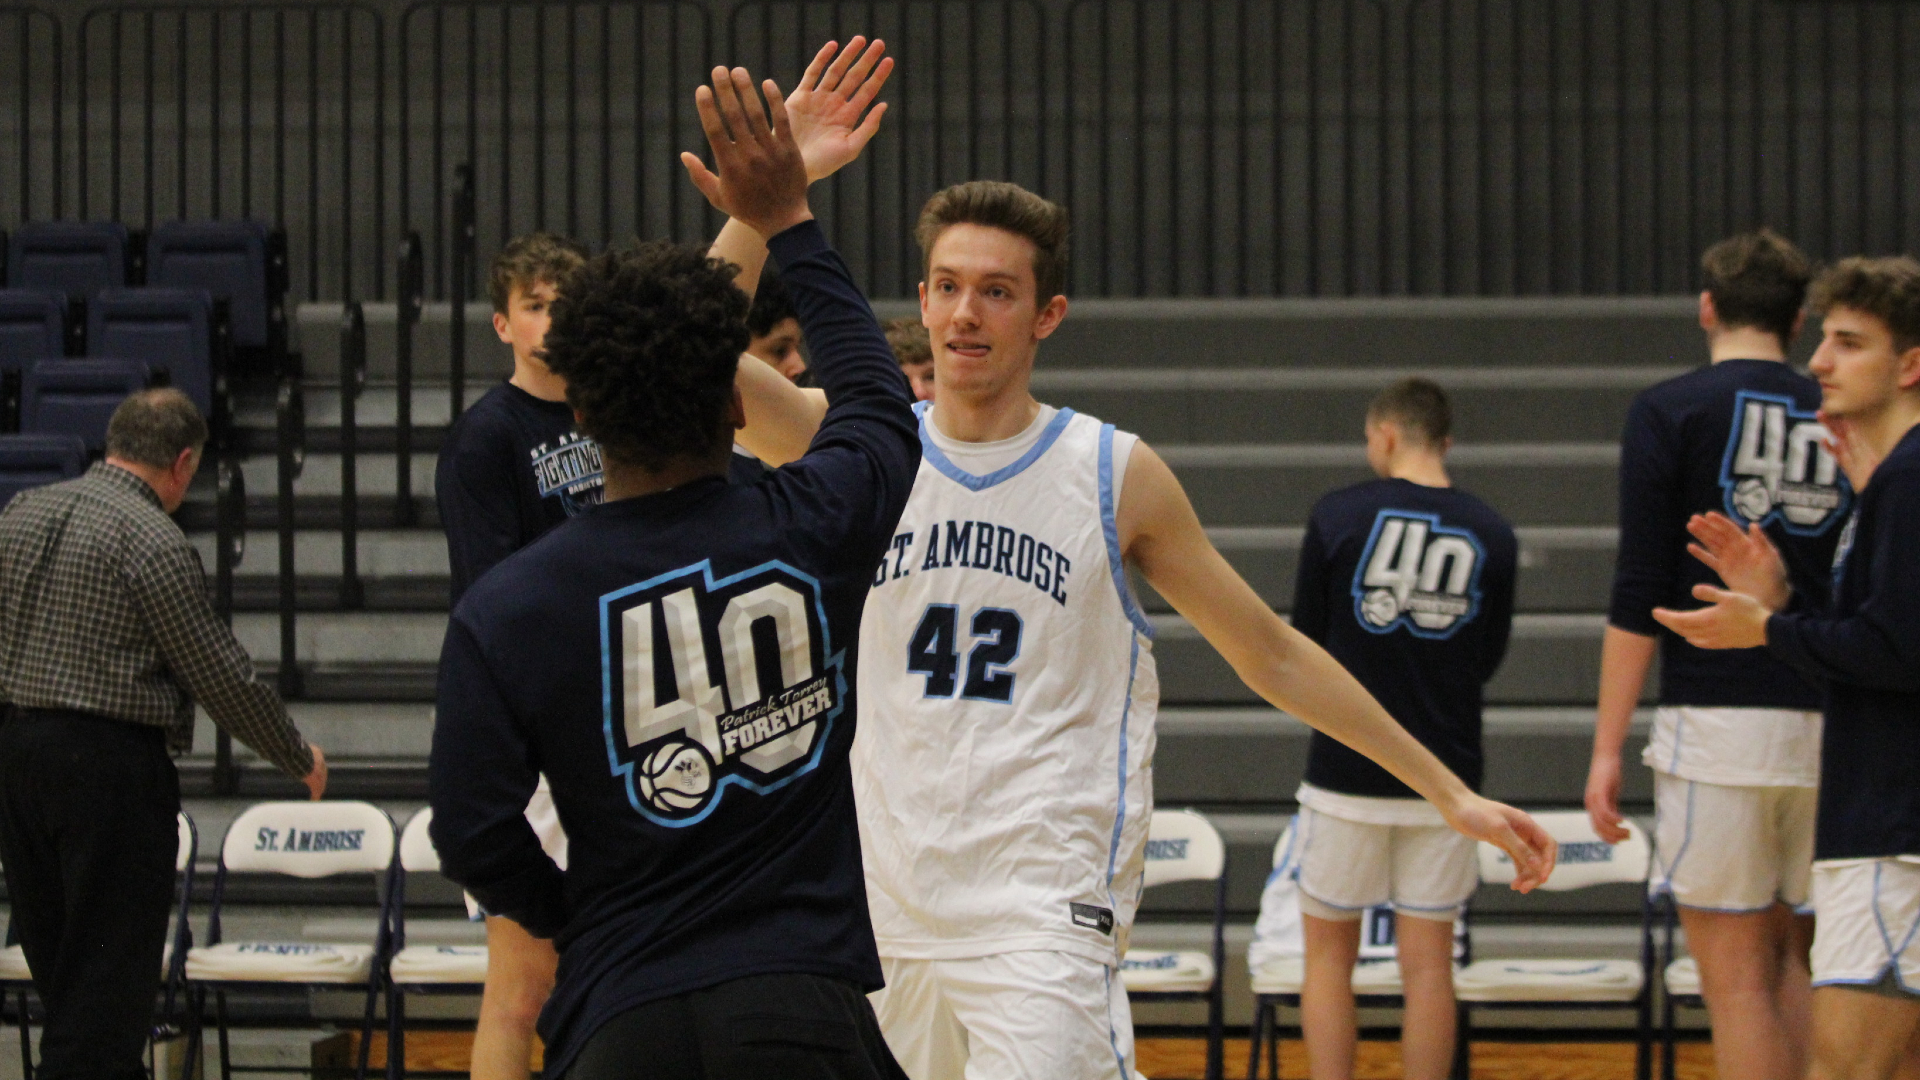 SAU pulls away in second half to defeat Governors State